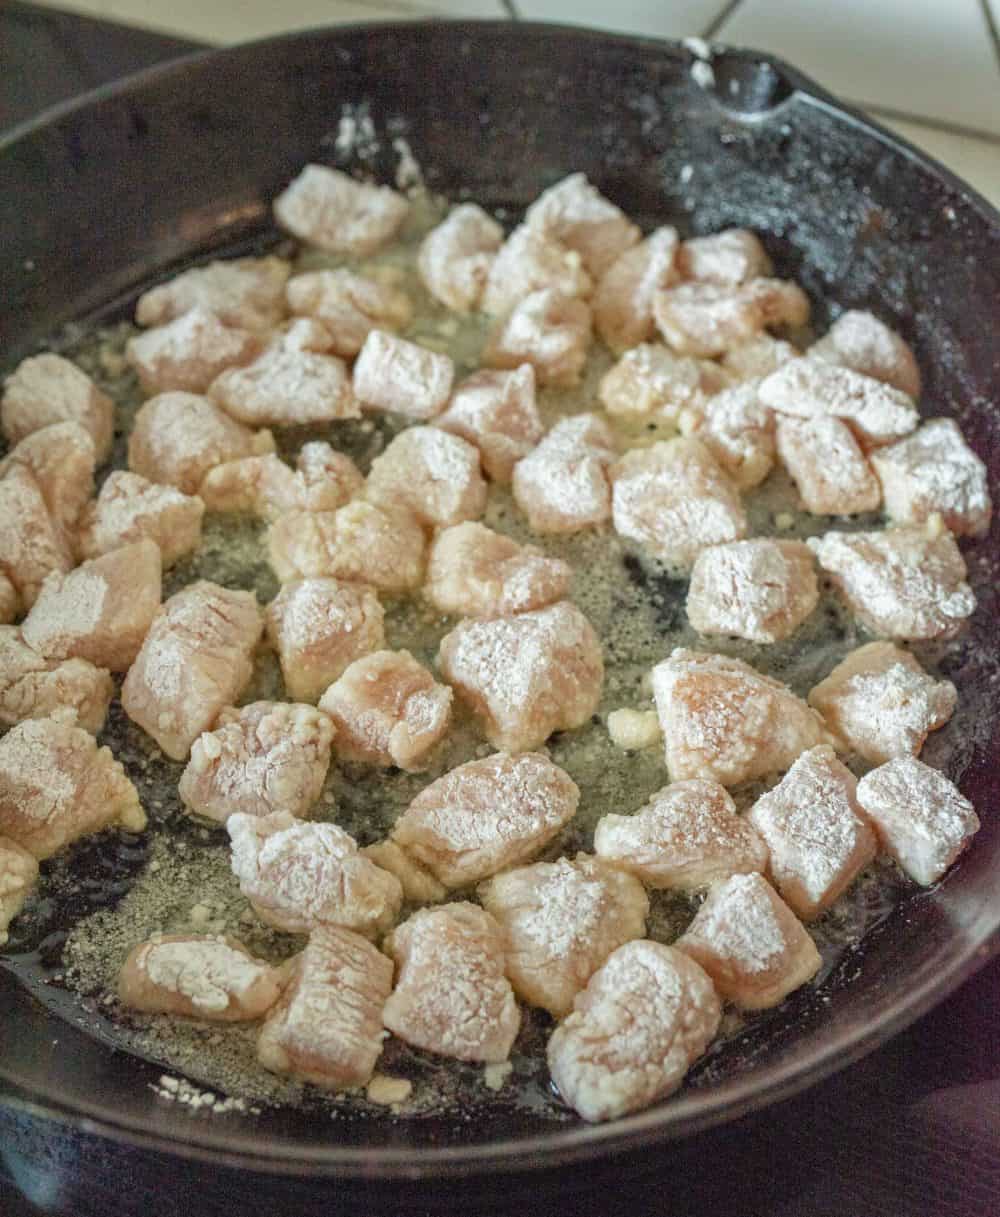 Chopped chicken cooking in a cast iron frying pan.